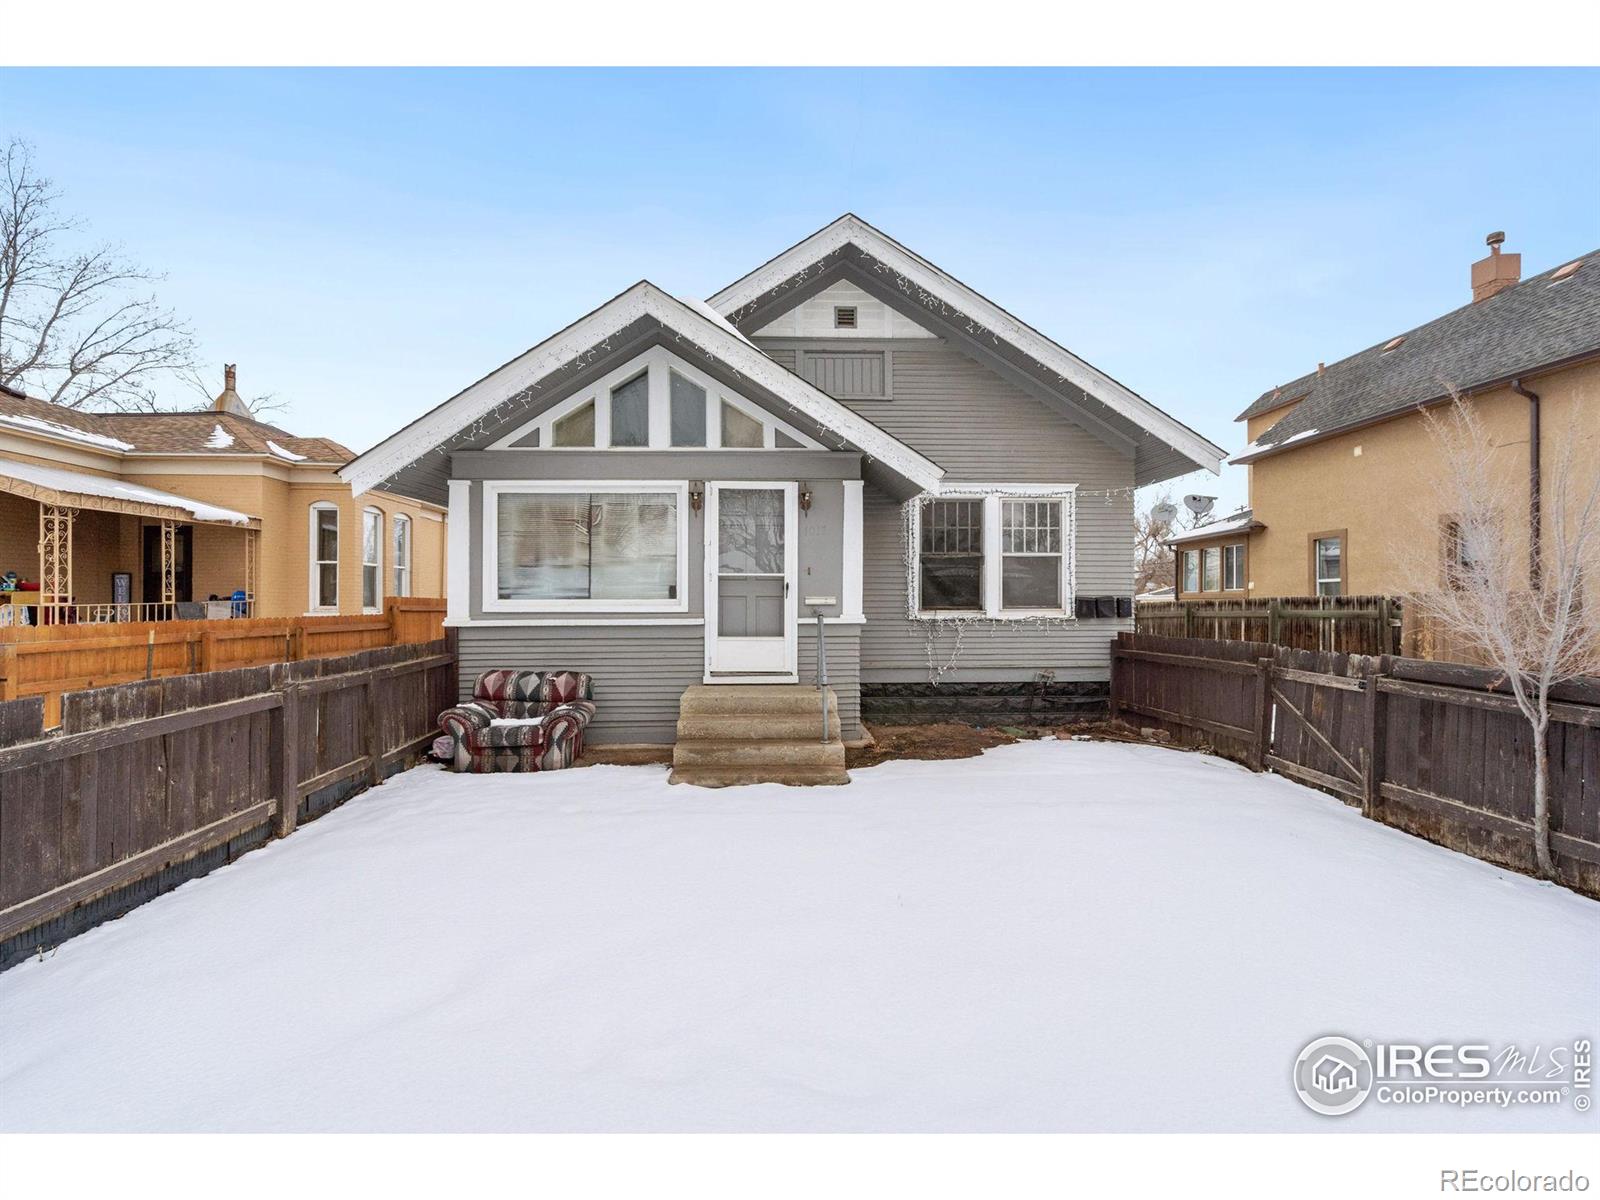 1017 5th, Greeley, CO